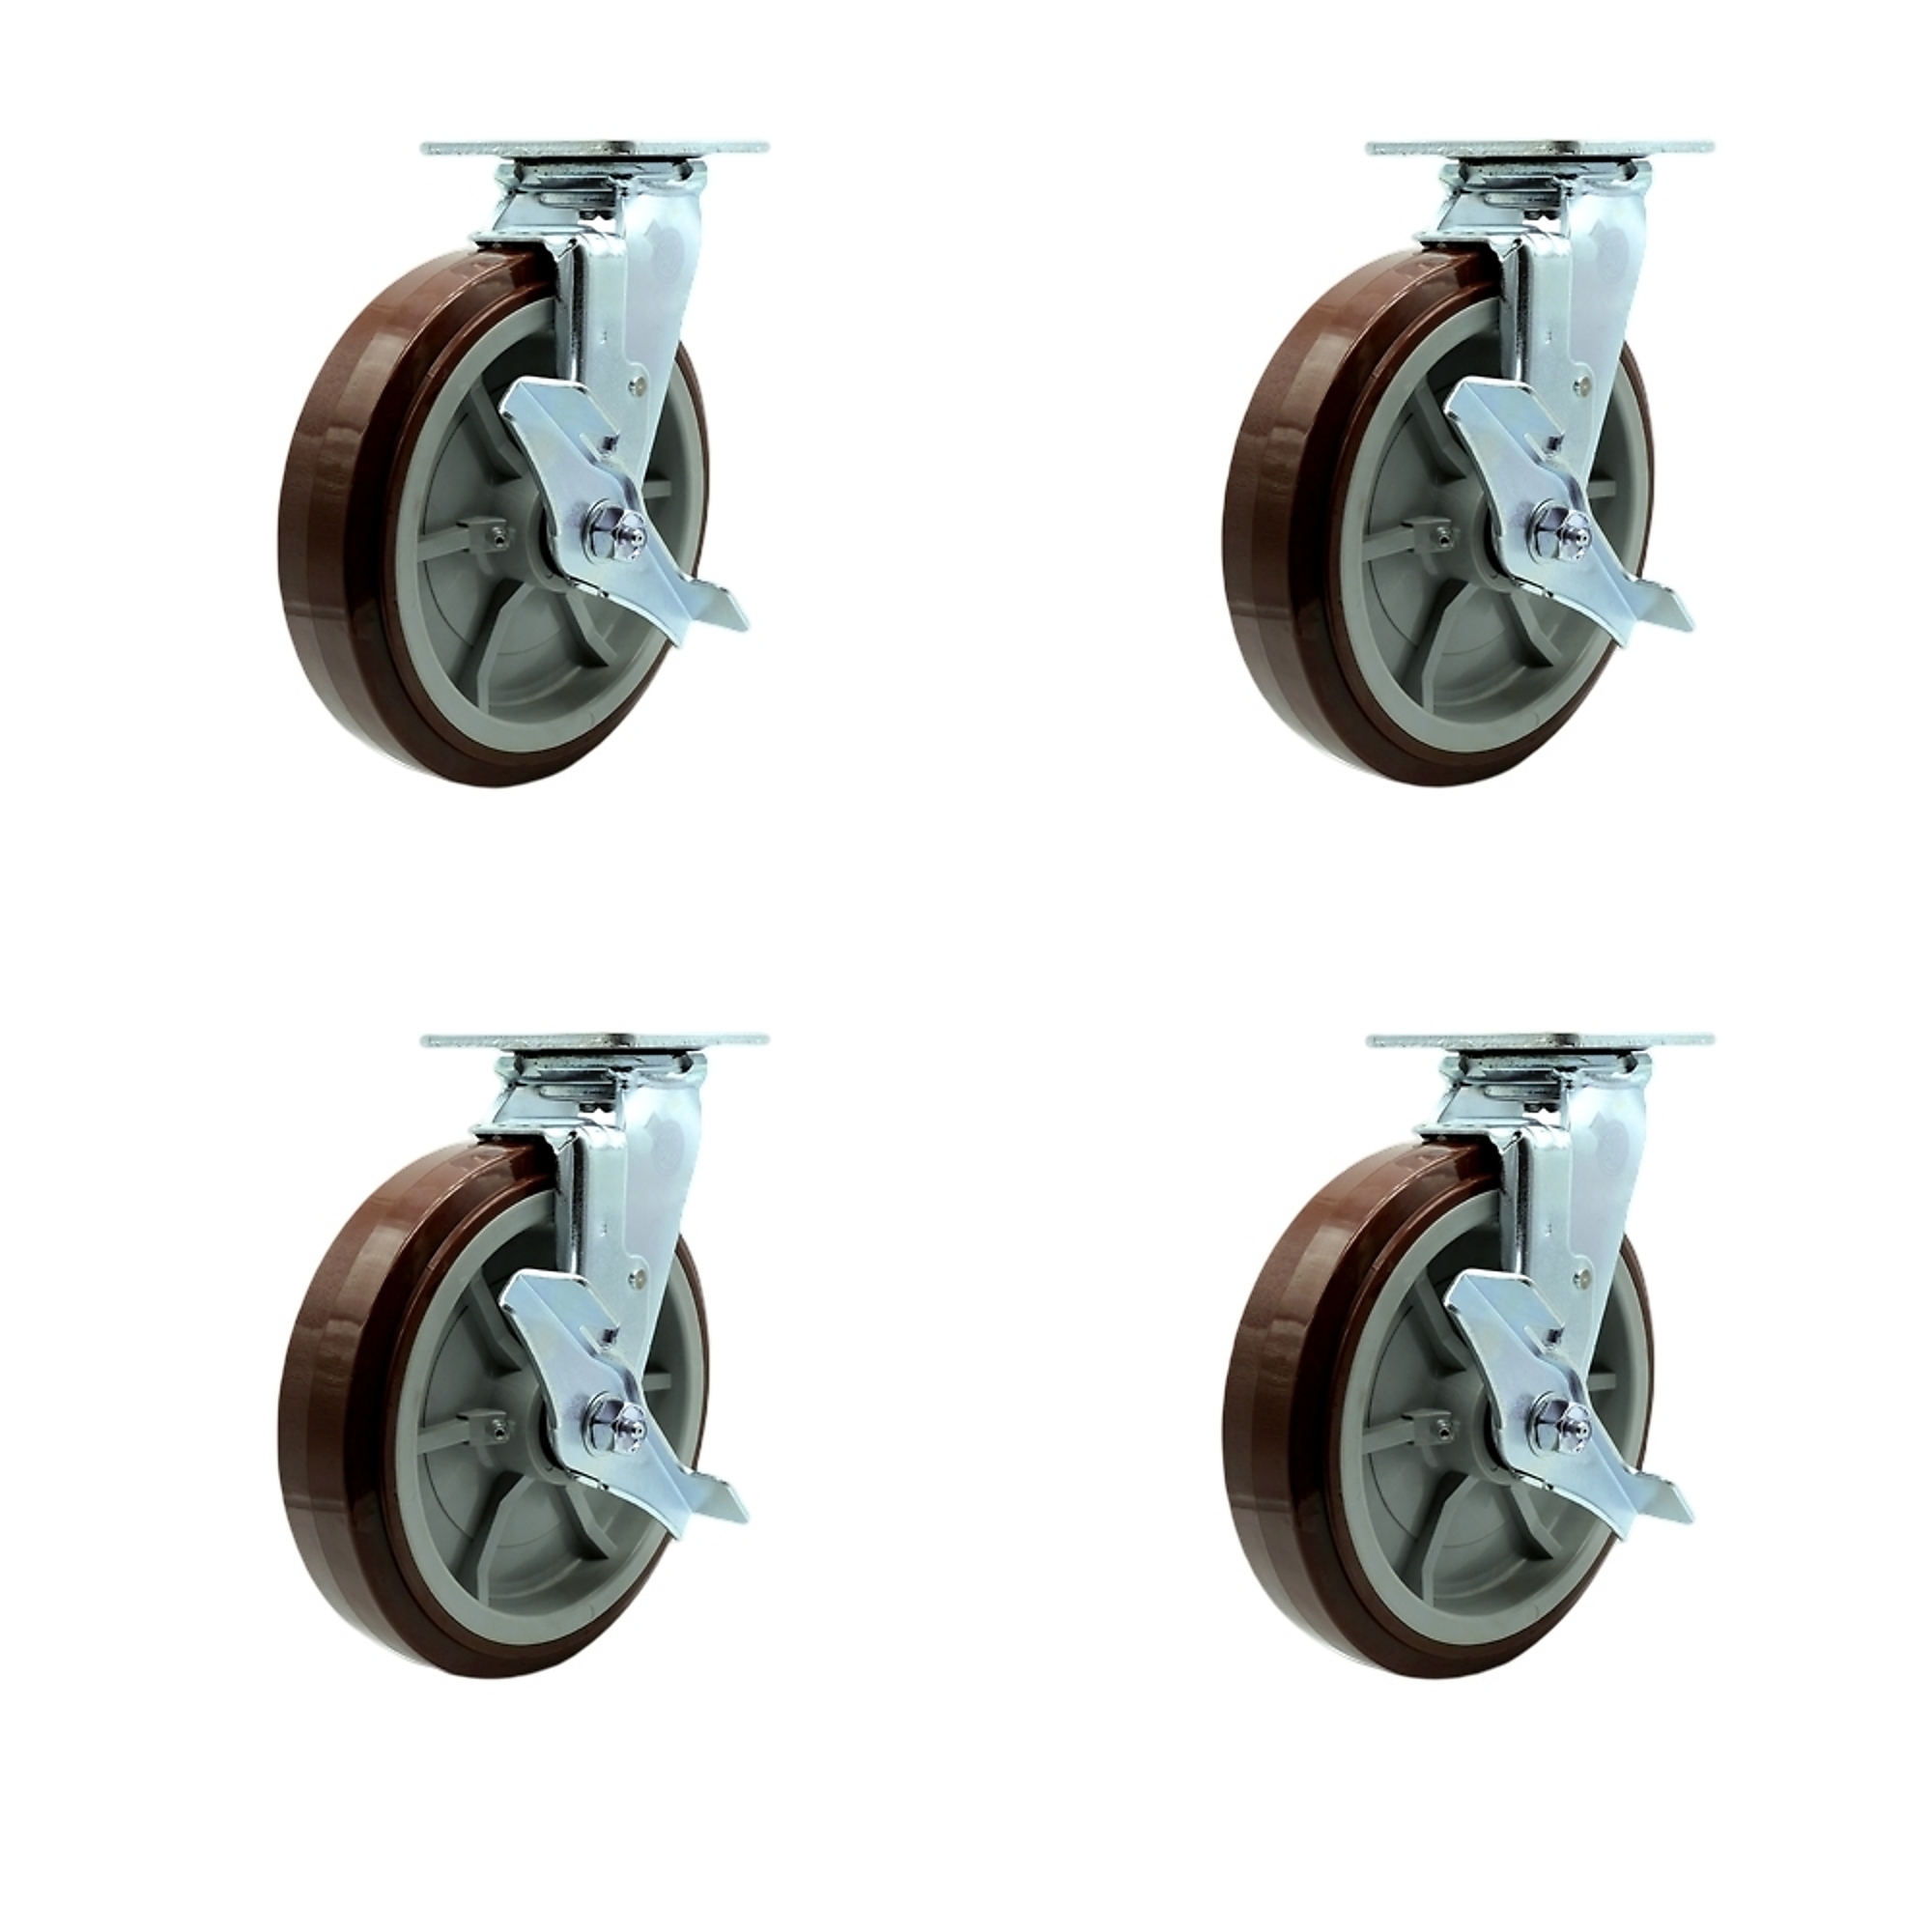 Service Caster, 8Inch x 2Inch Plate Casters, Wheel Diameter 8 in, Caster Type Swivel, Package (qty.) 4, Model GRE-SCC-30CS820-PPUR-TLB-4 -  734005021585